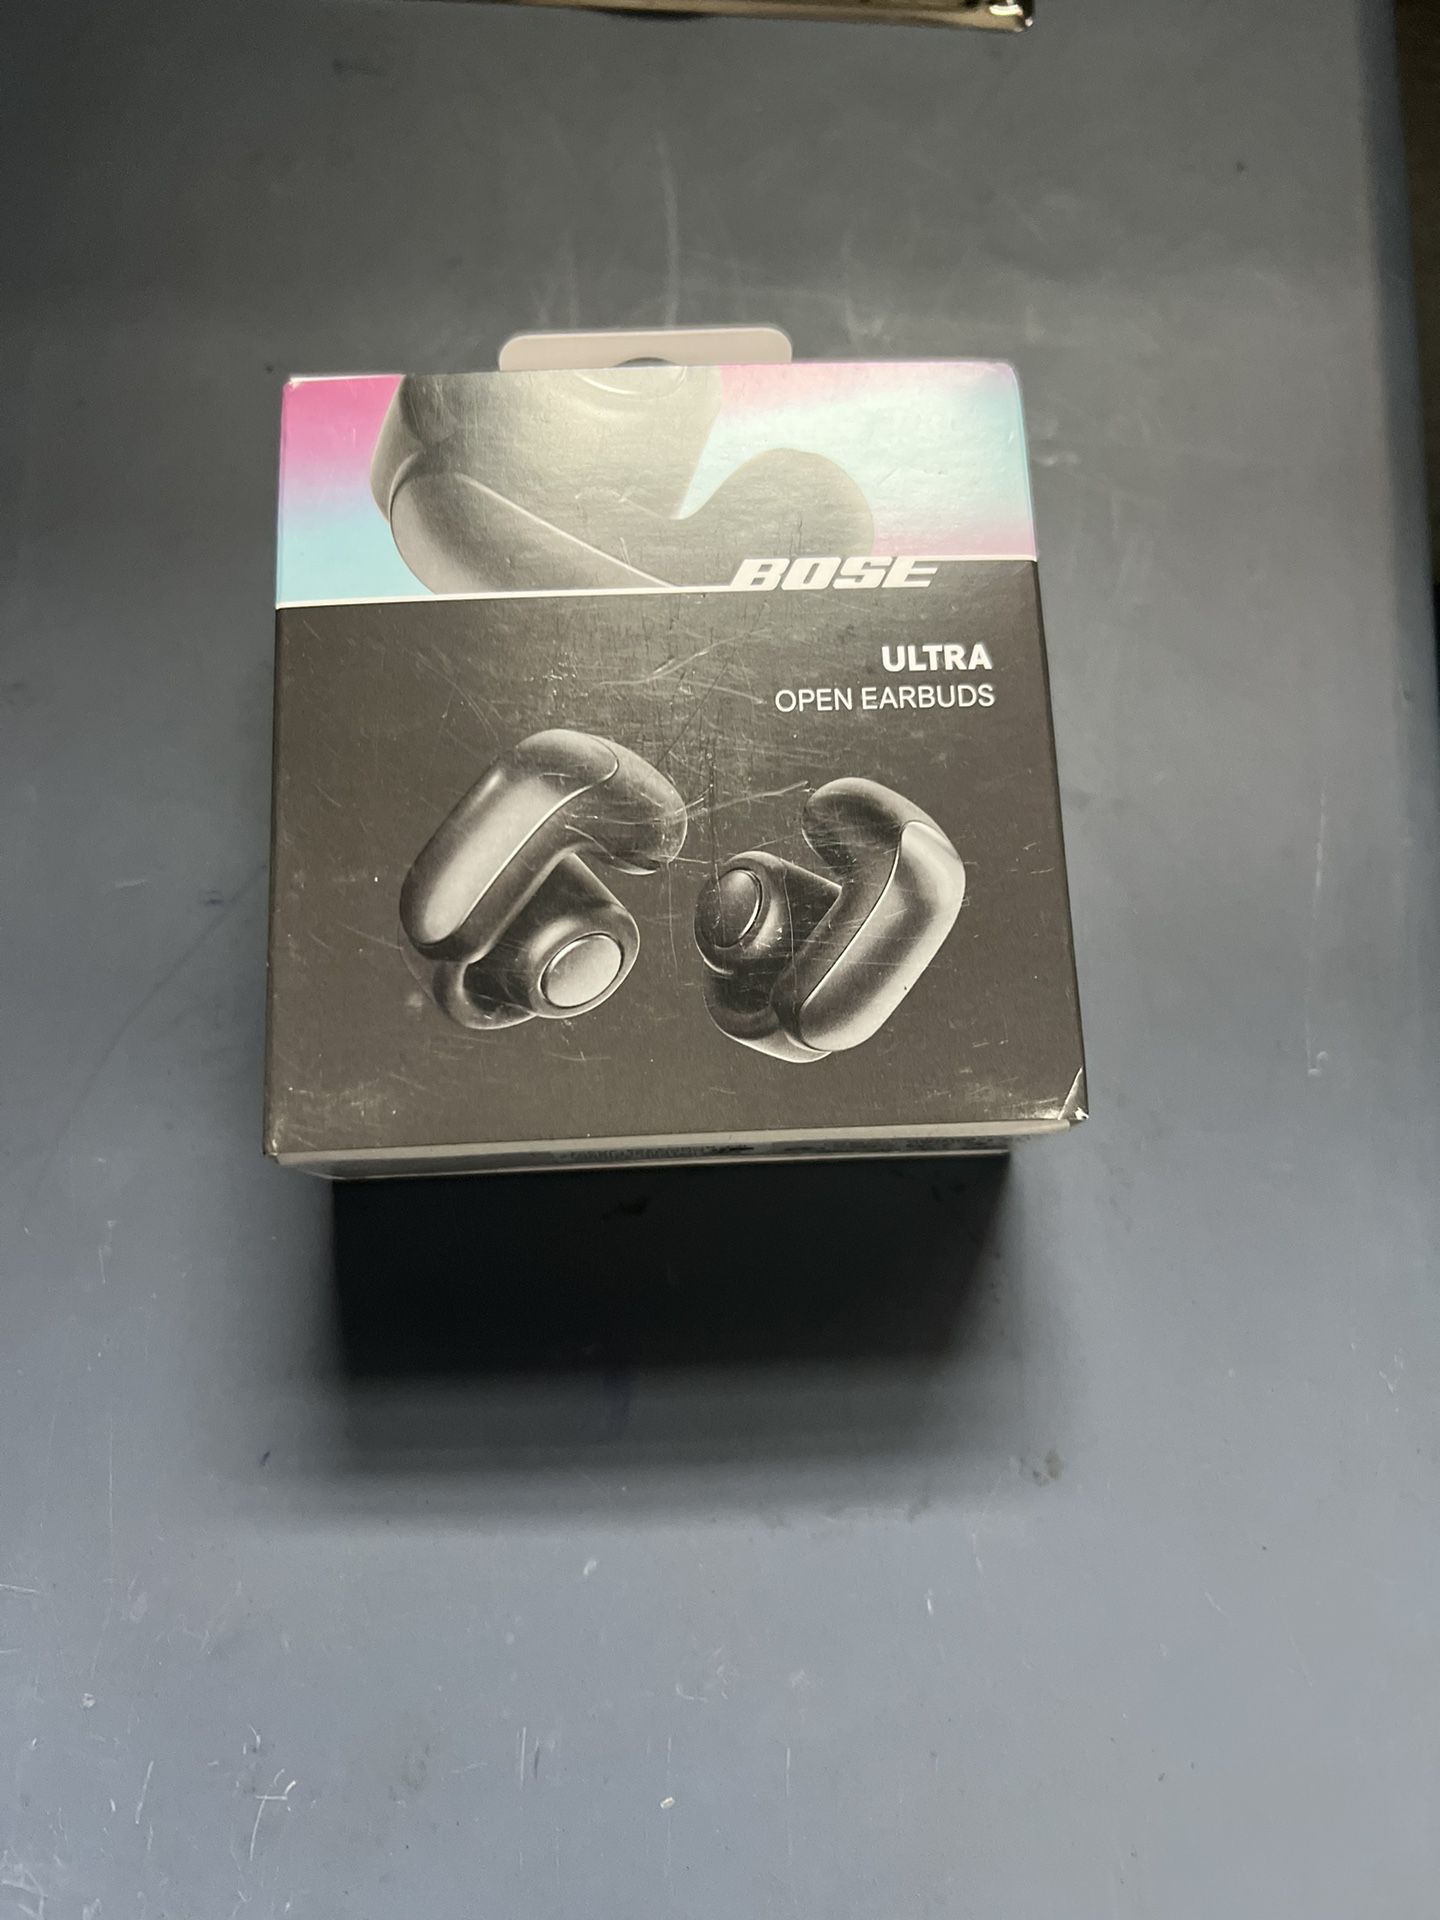 Bose Ultra Open Earbuds-Brand new! Never opened! 